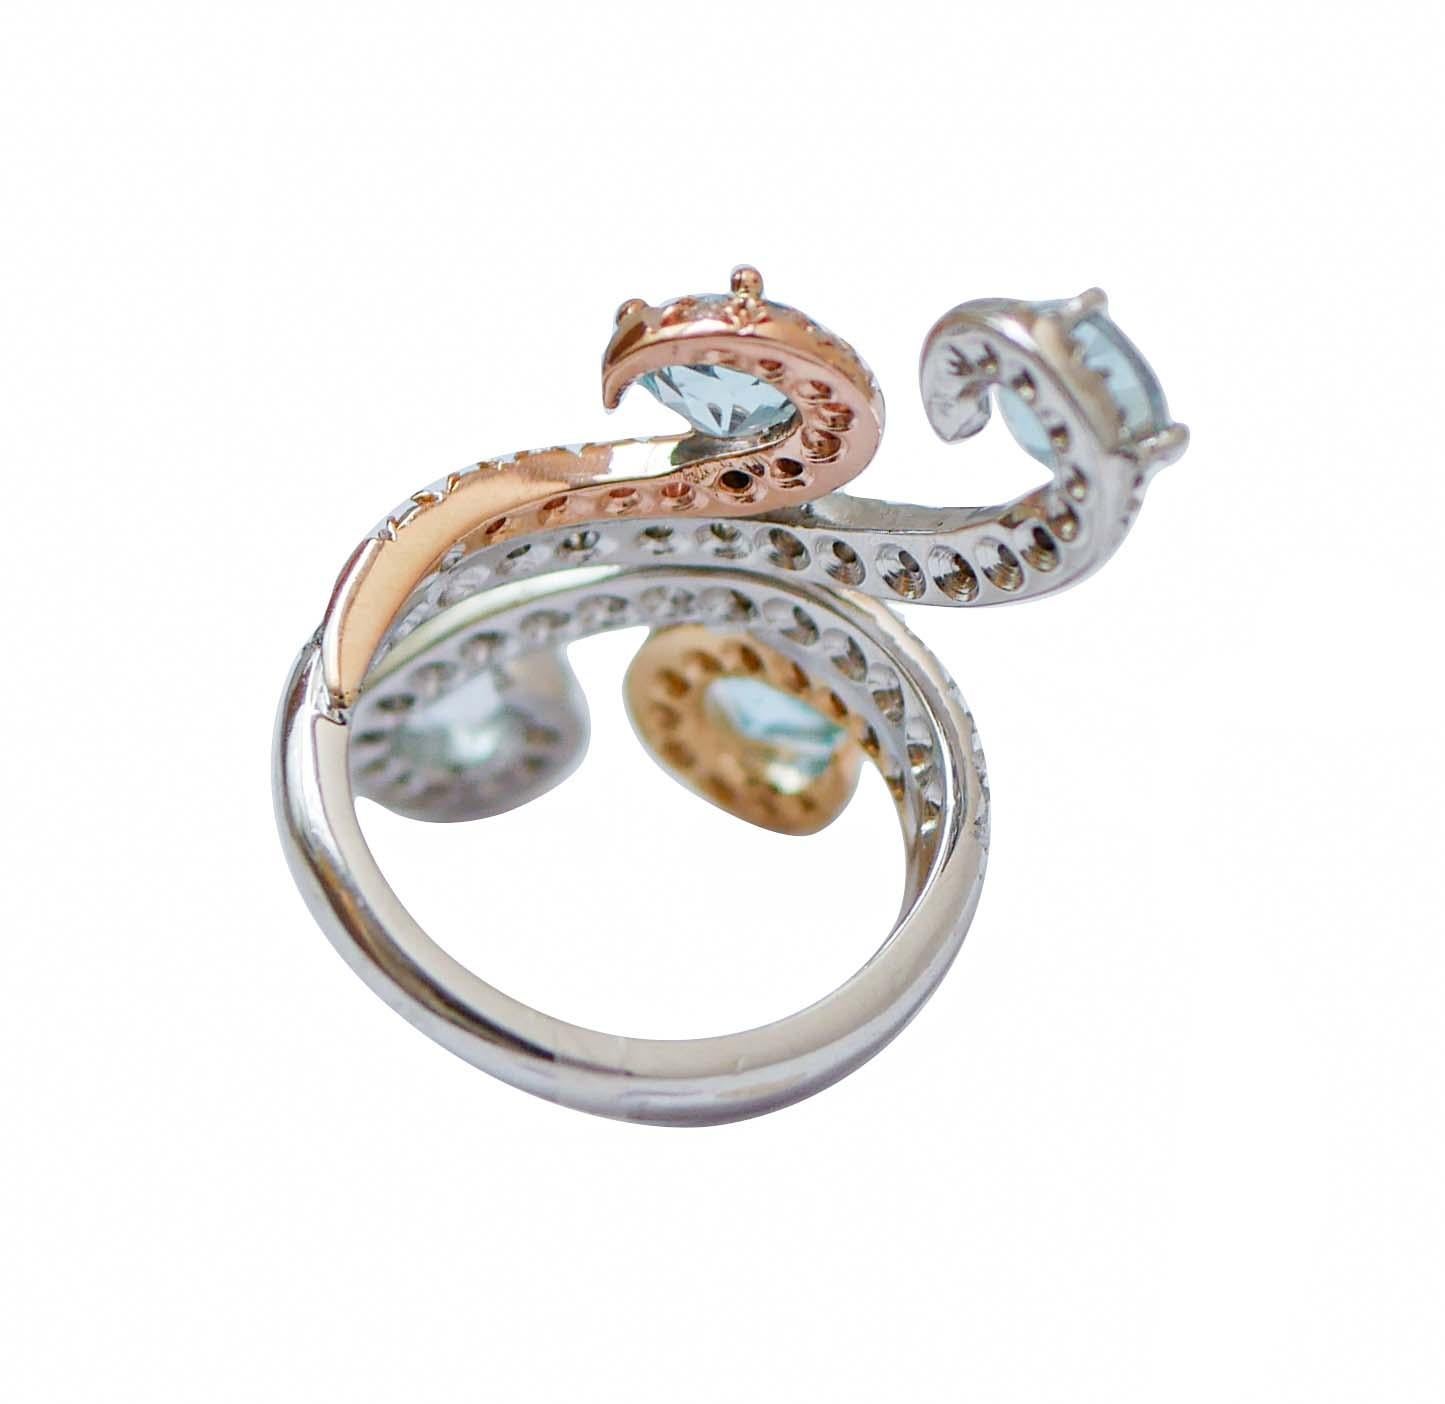 Mixed Cut Aquamarine Colour Topazs, Diamonds, 18Kt White Gold, Rose Gold, Yellow Gold Ring For Sale